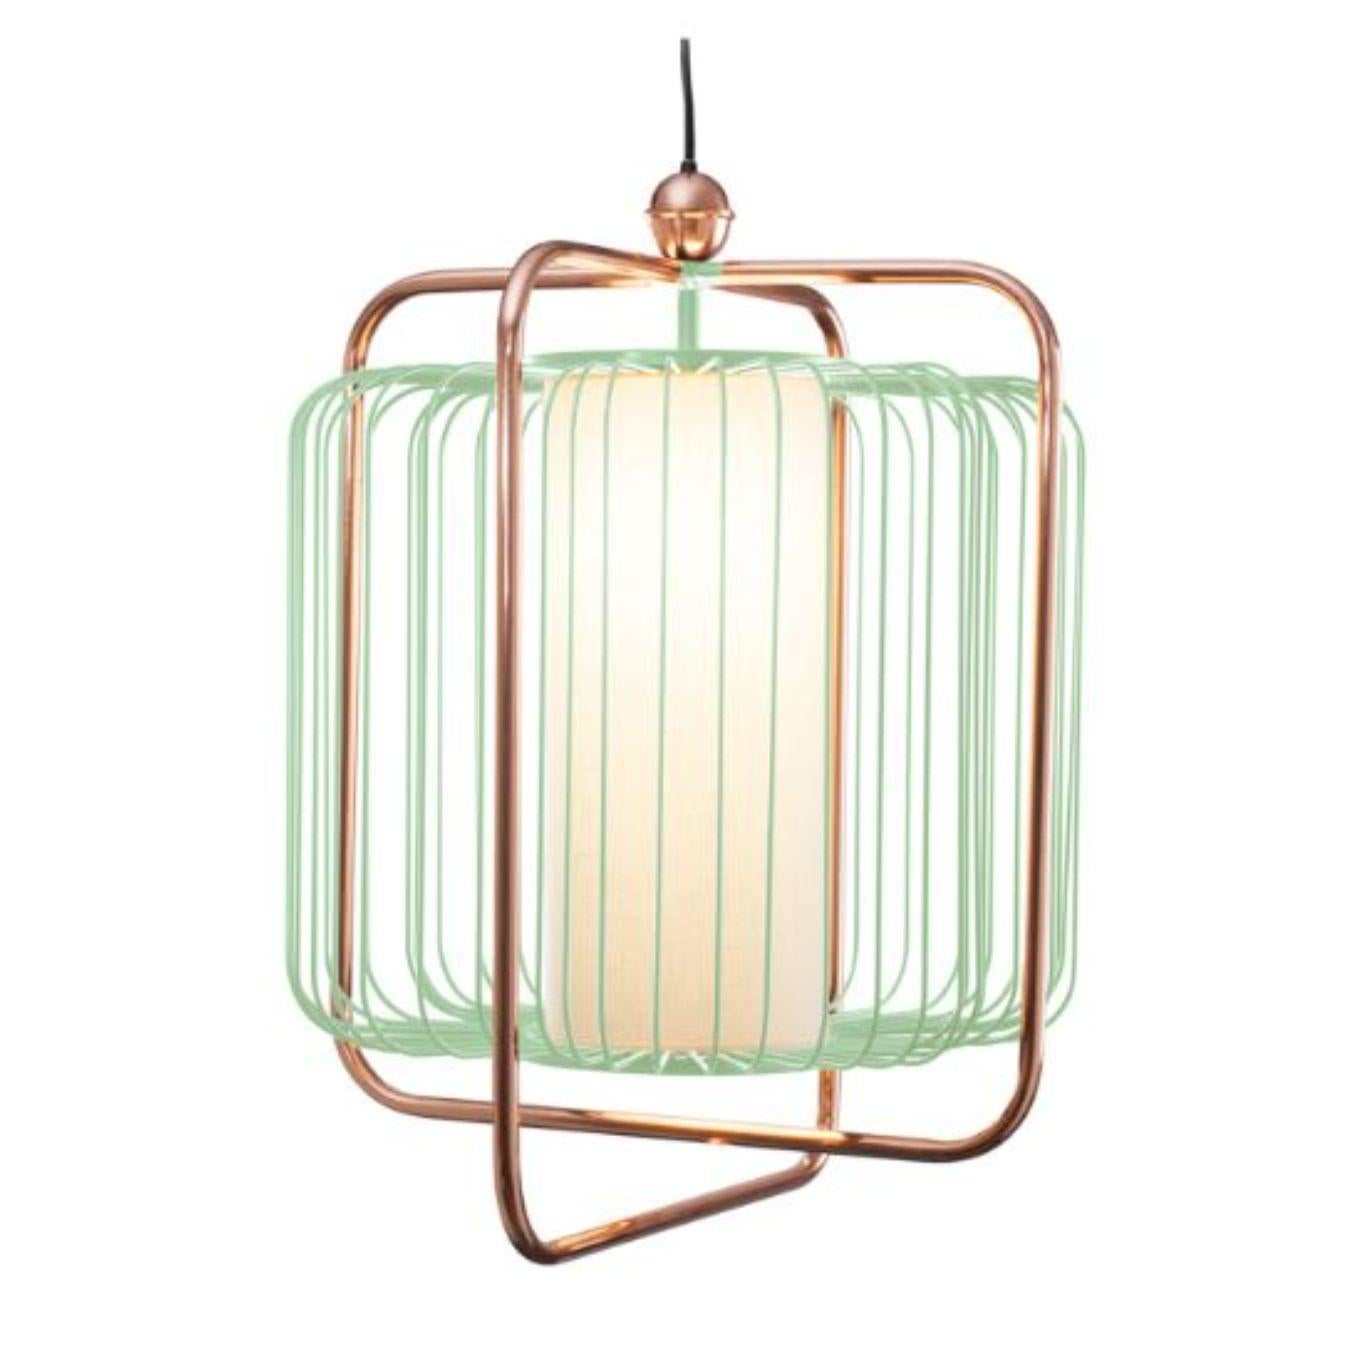 Copper and Dream Jules Suspension lamp by Dooq
Dimensions: W 73 x D 73 x H 72 cm
Materials: lacquered metal, polished or brushed metal, copper.
abat-jour: cotton
Also available in different colors and